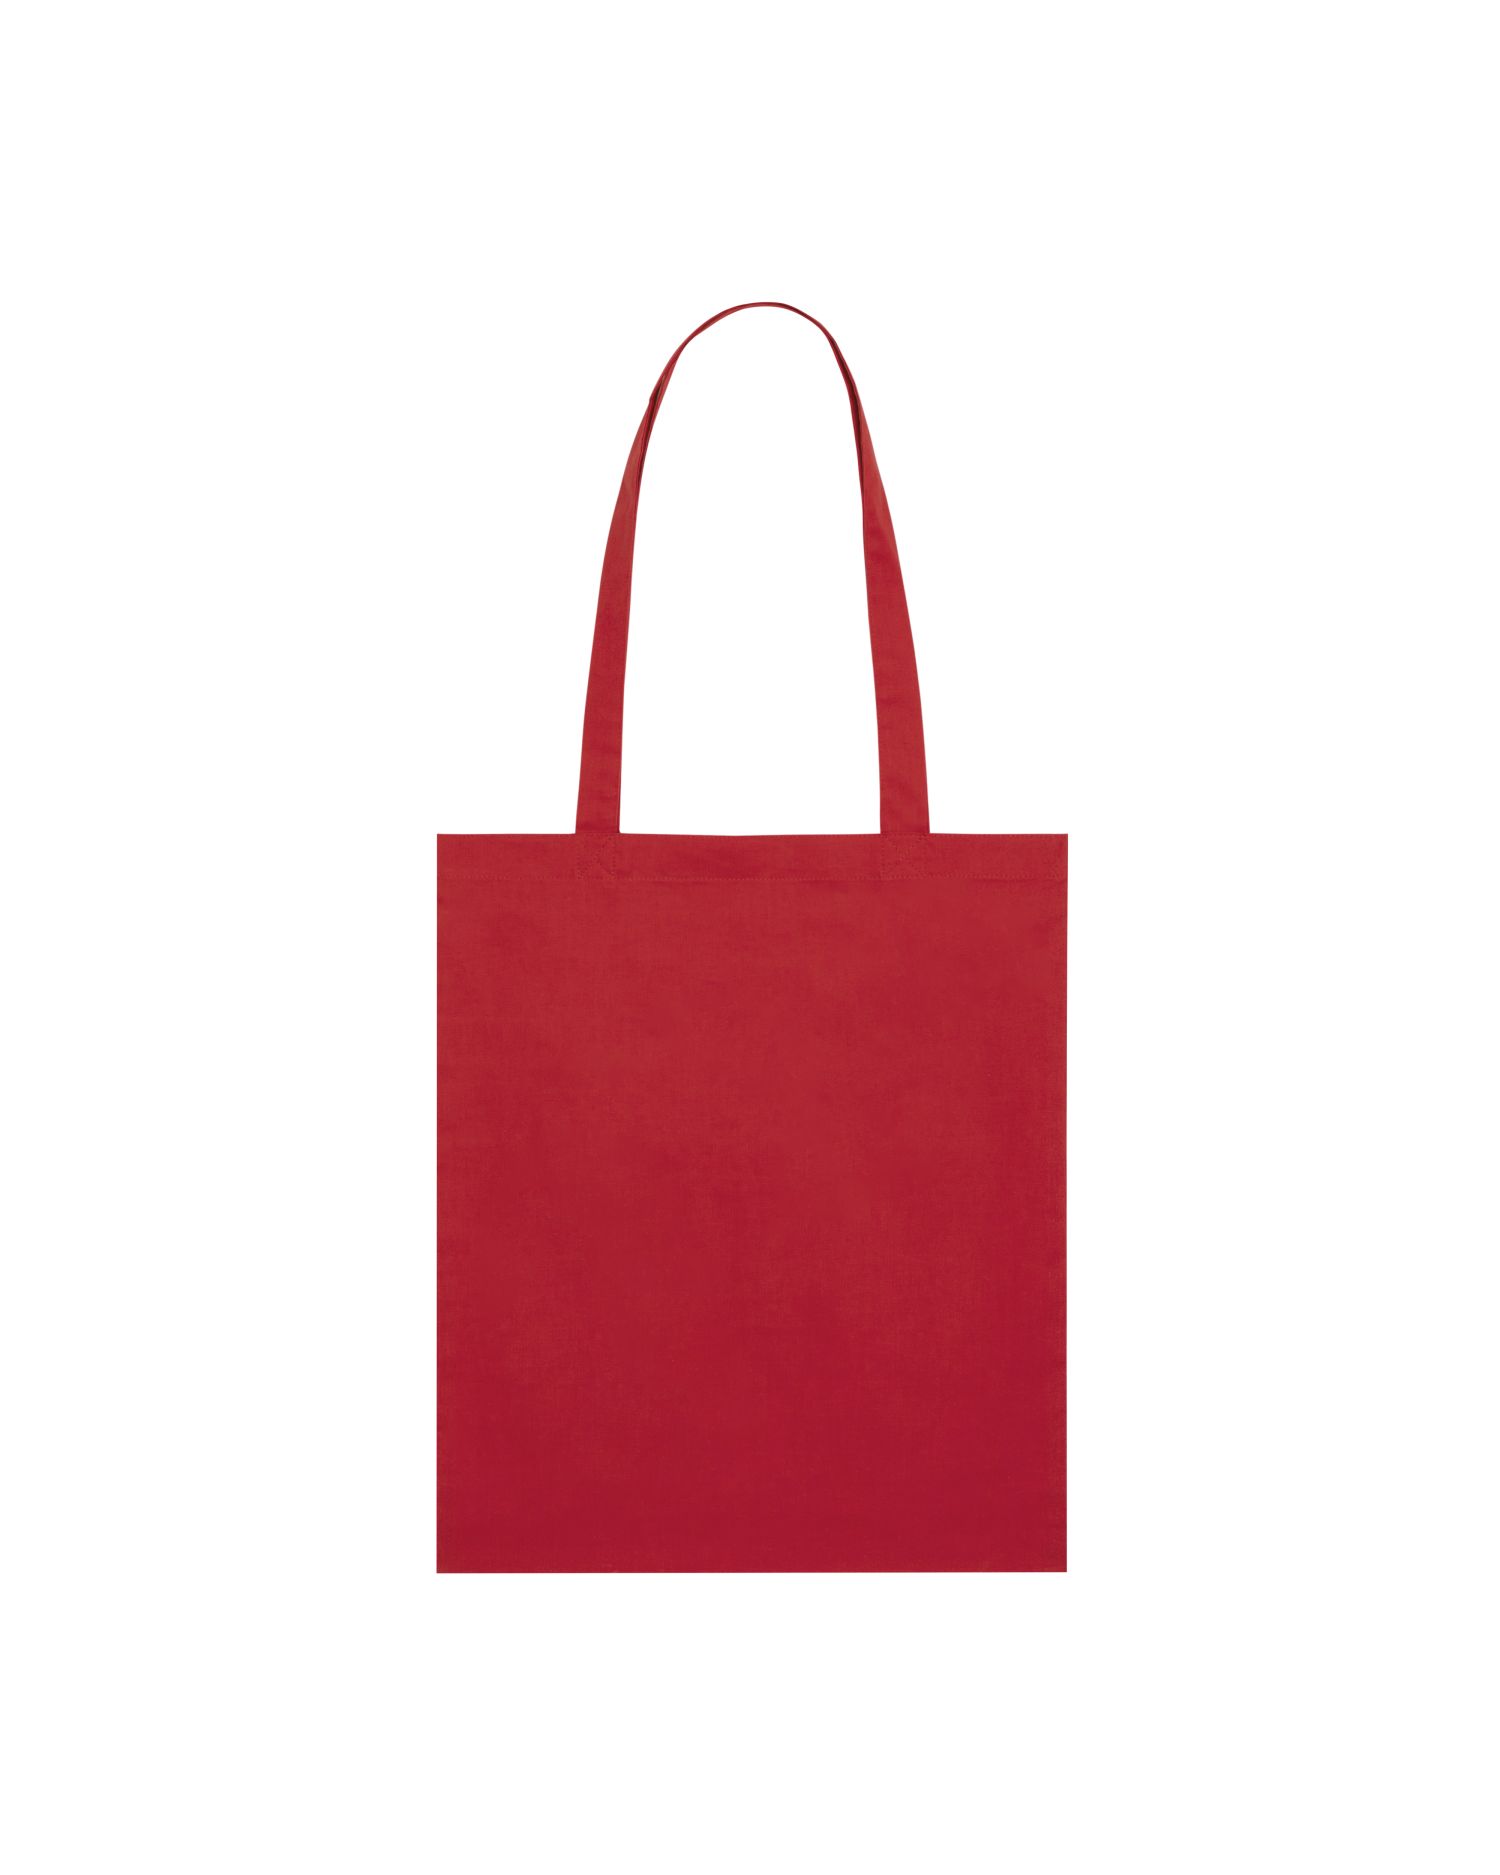  Light Tote Bag in Farbe Red